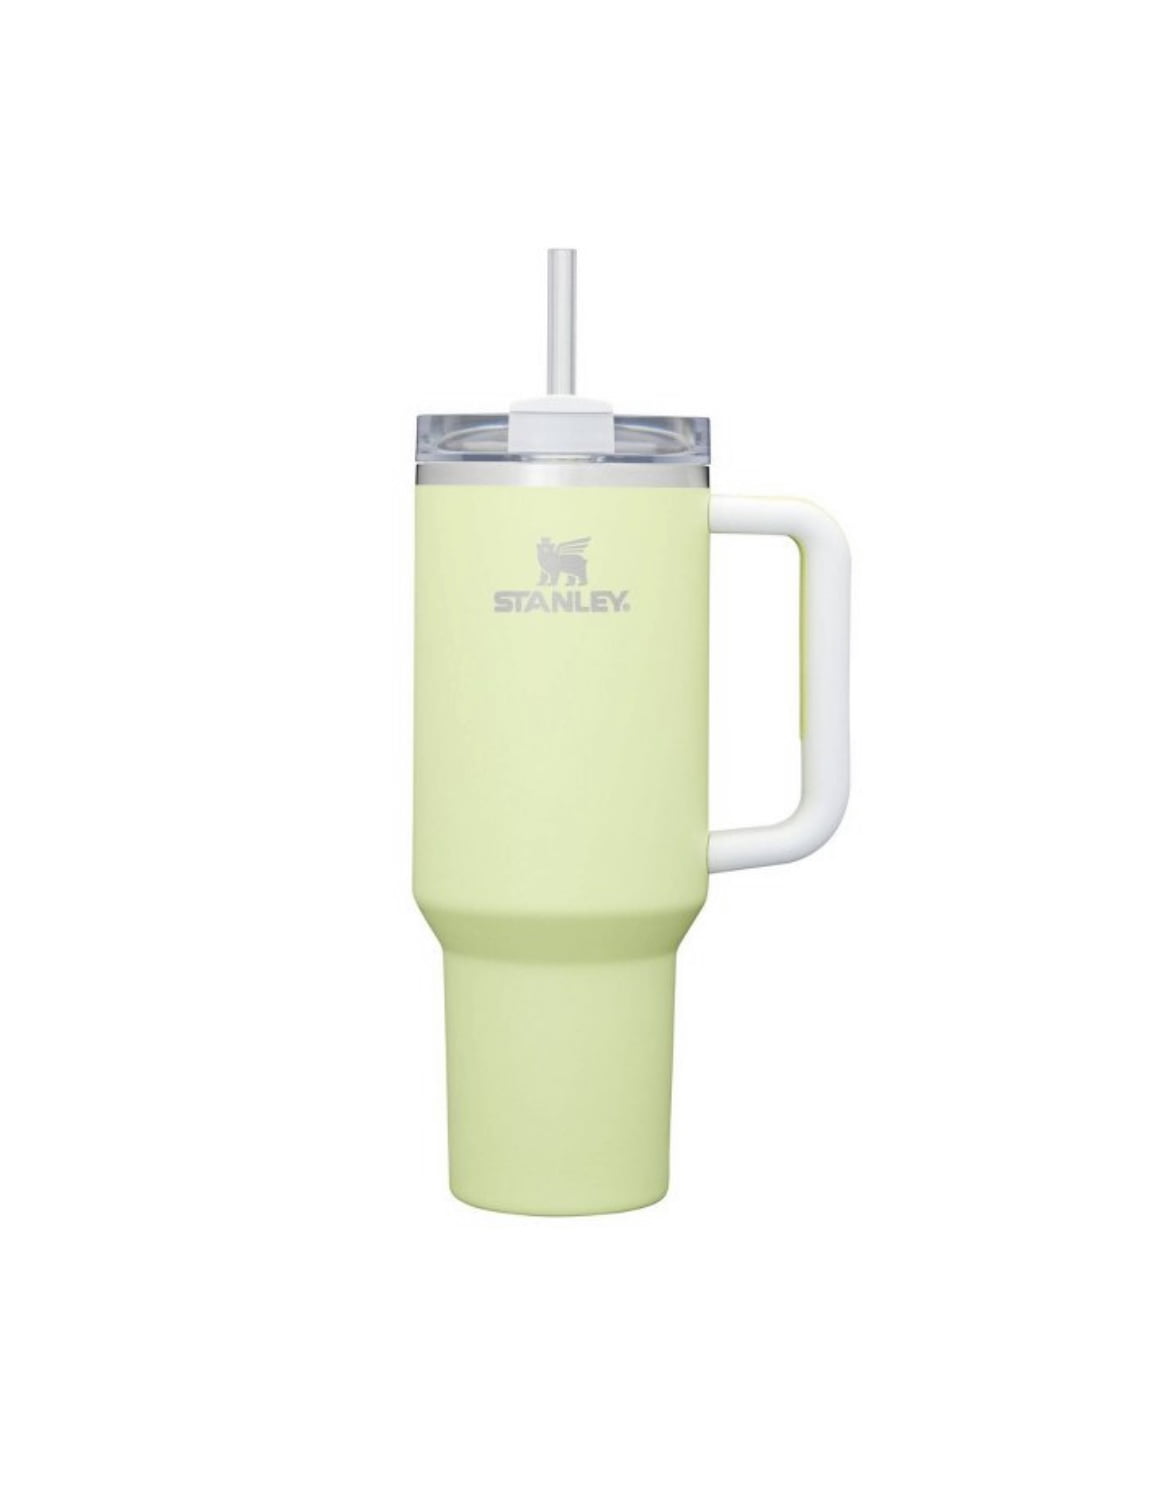 Stanley Dining | Stanley | Citron Colorblock 40 oz Quencher Tumbler | Color: Green | Size: Os | Kecaruso23's Closet